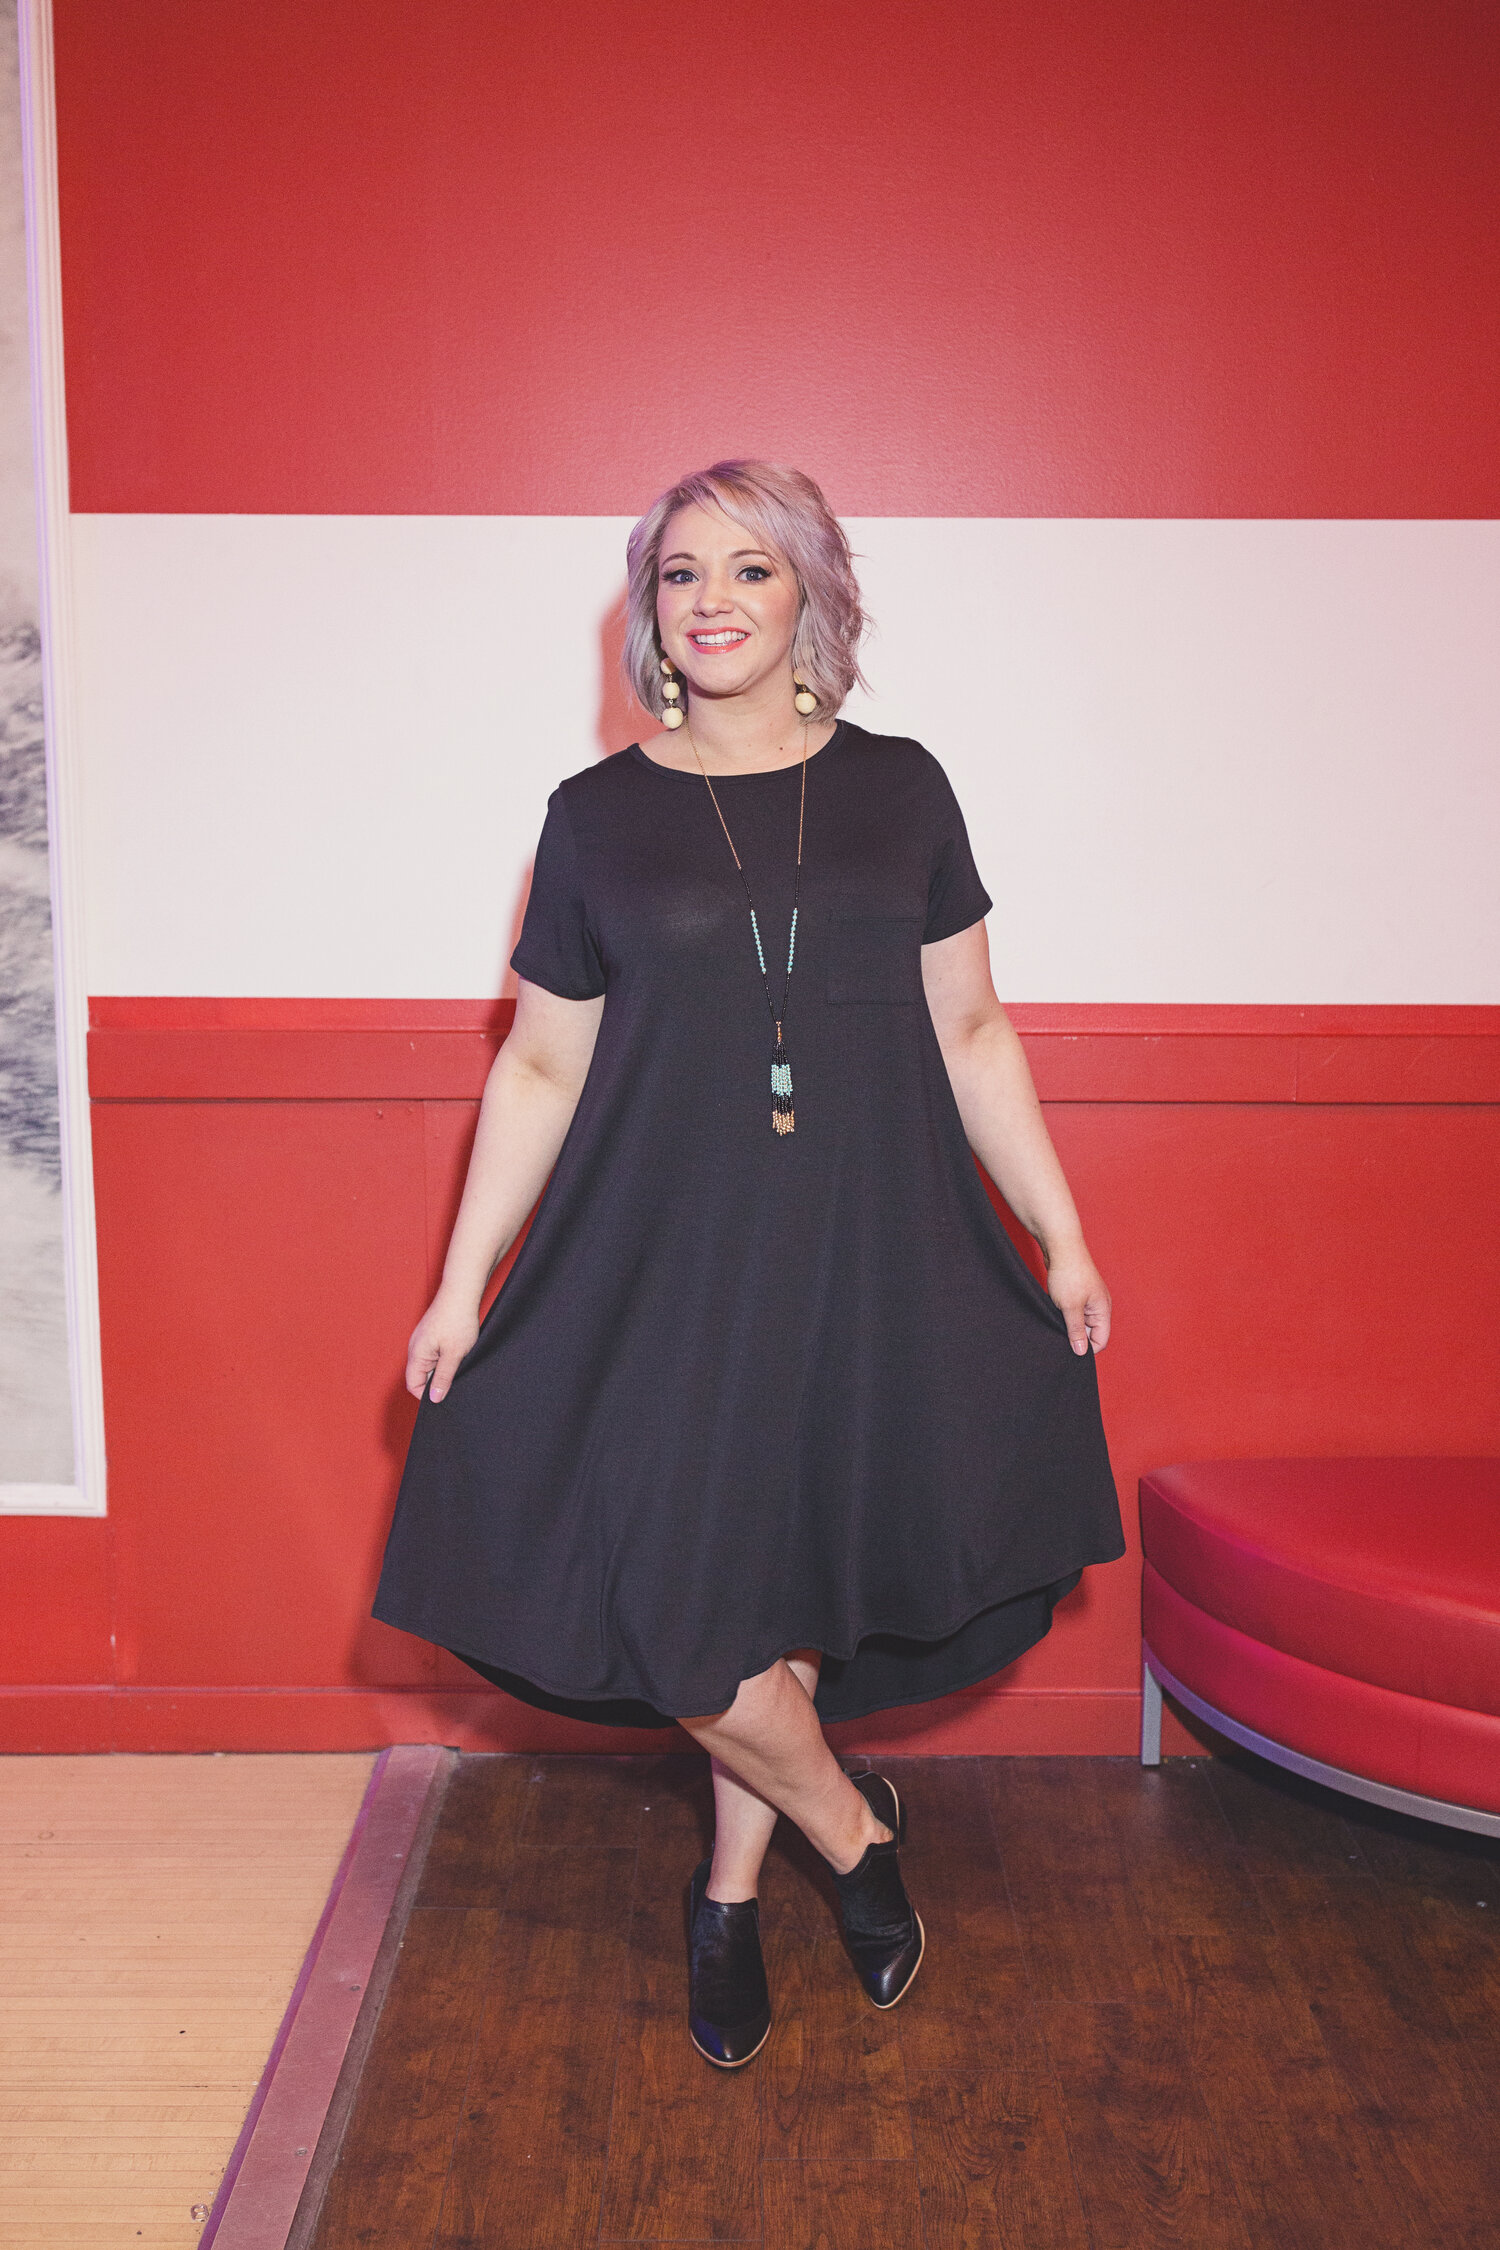 CARLY HOW TO STYLE A BLACK DRESS FOR EVERY OCCASION